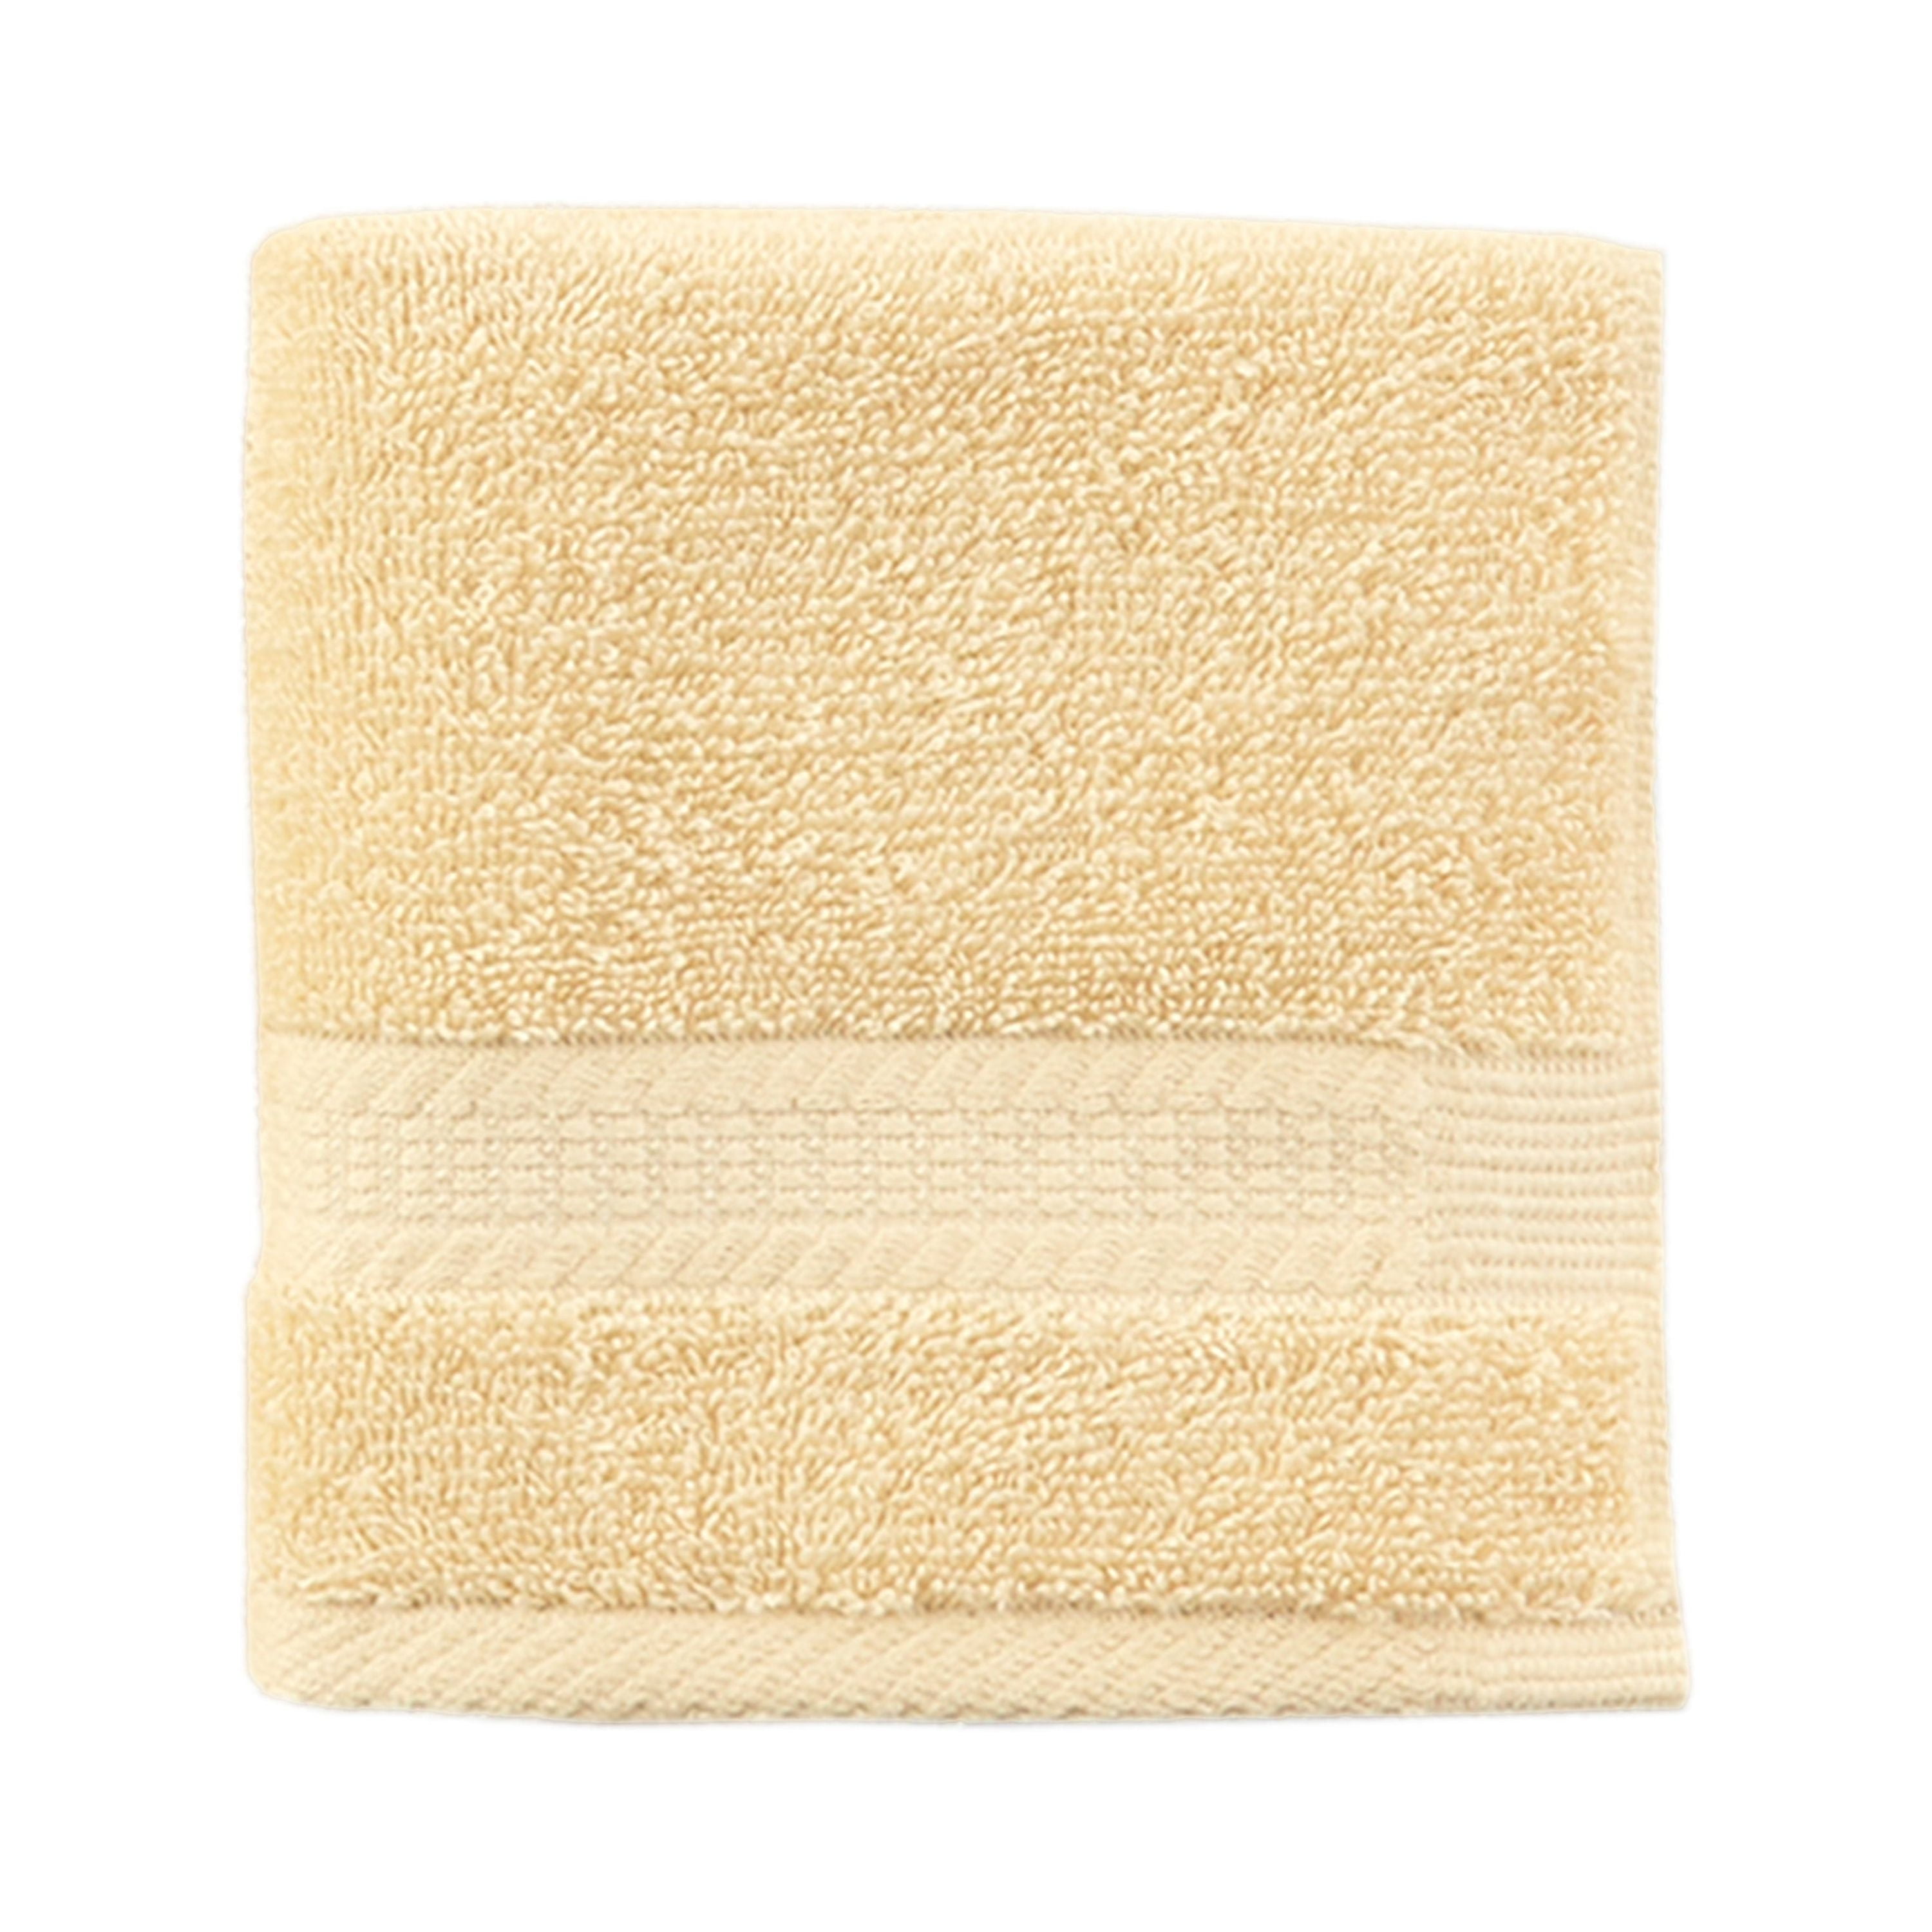 ECOEXISTENCE PALE YELLOW SOLID FLUFFY COTTON BATH,HAND TOWEL OR 4 WASHCLOTHS